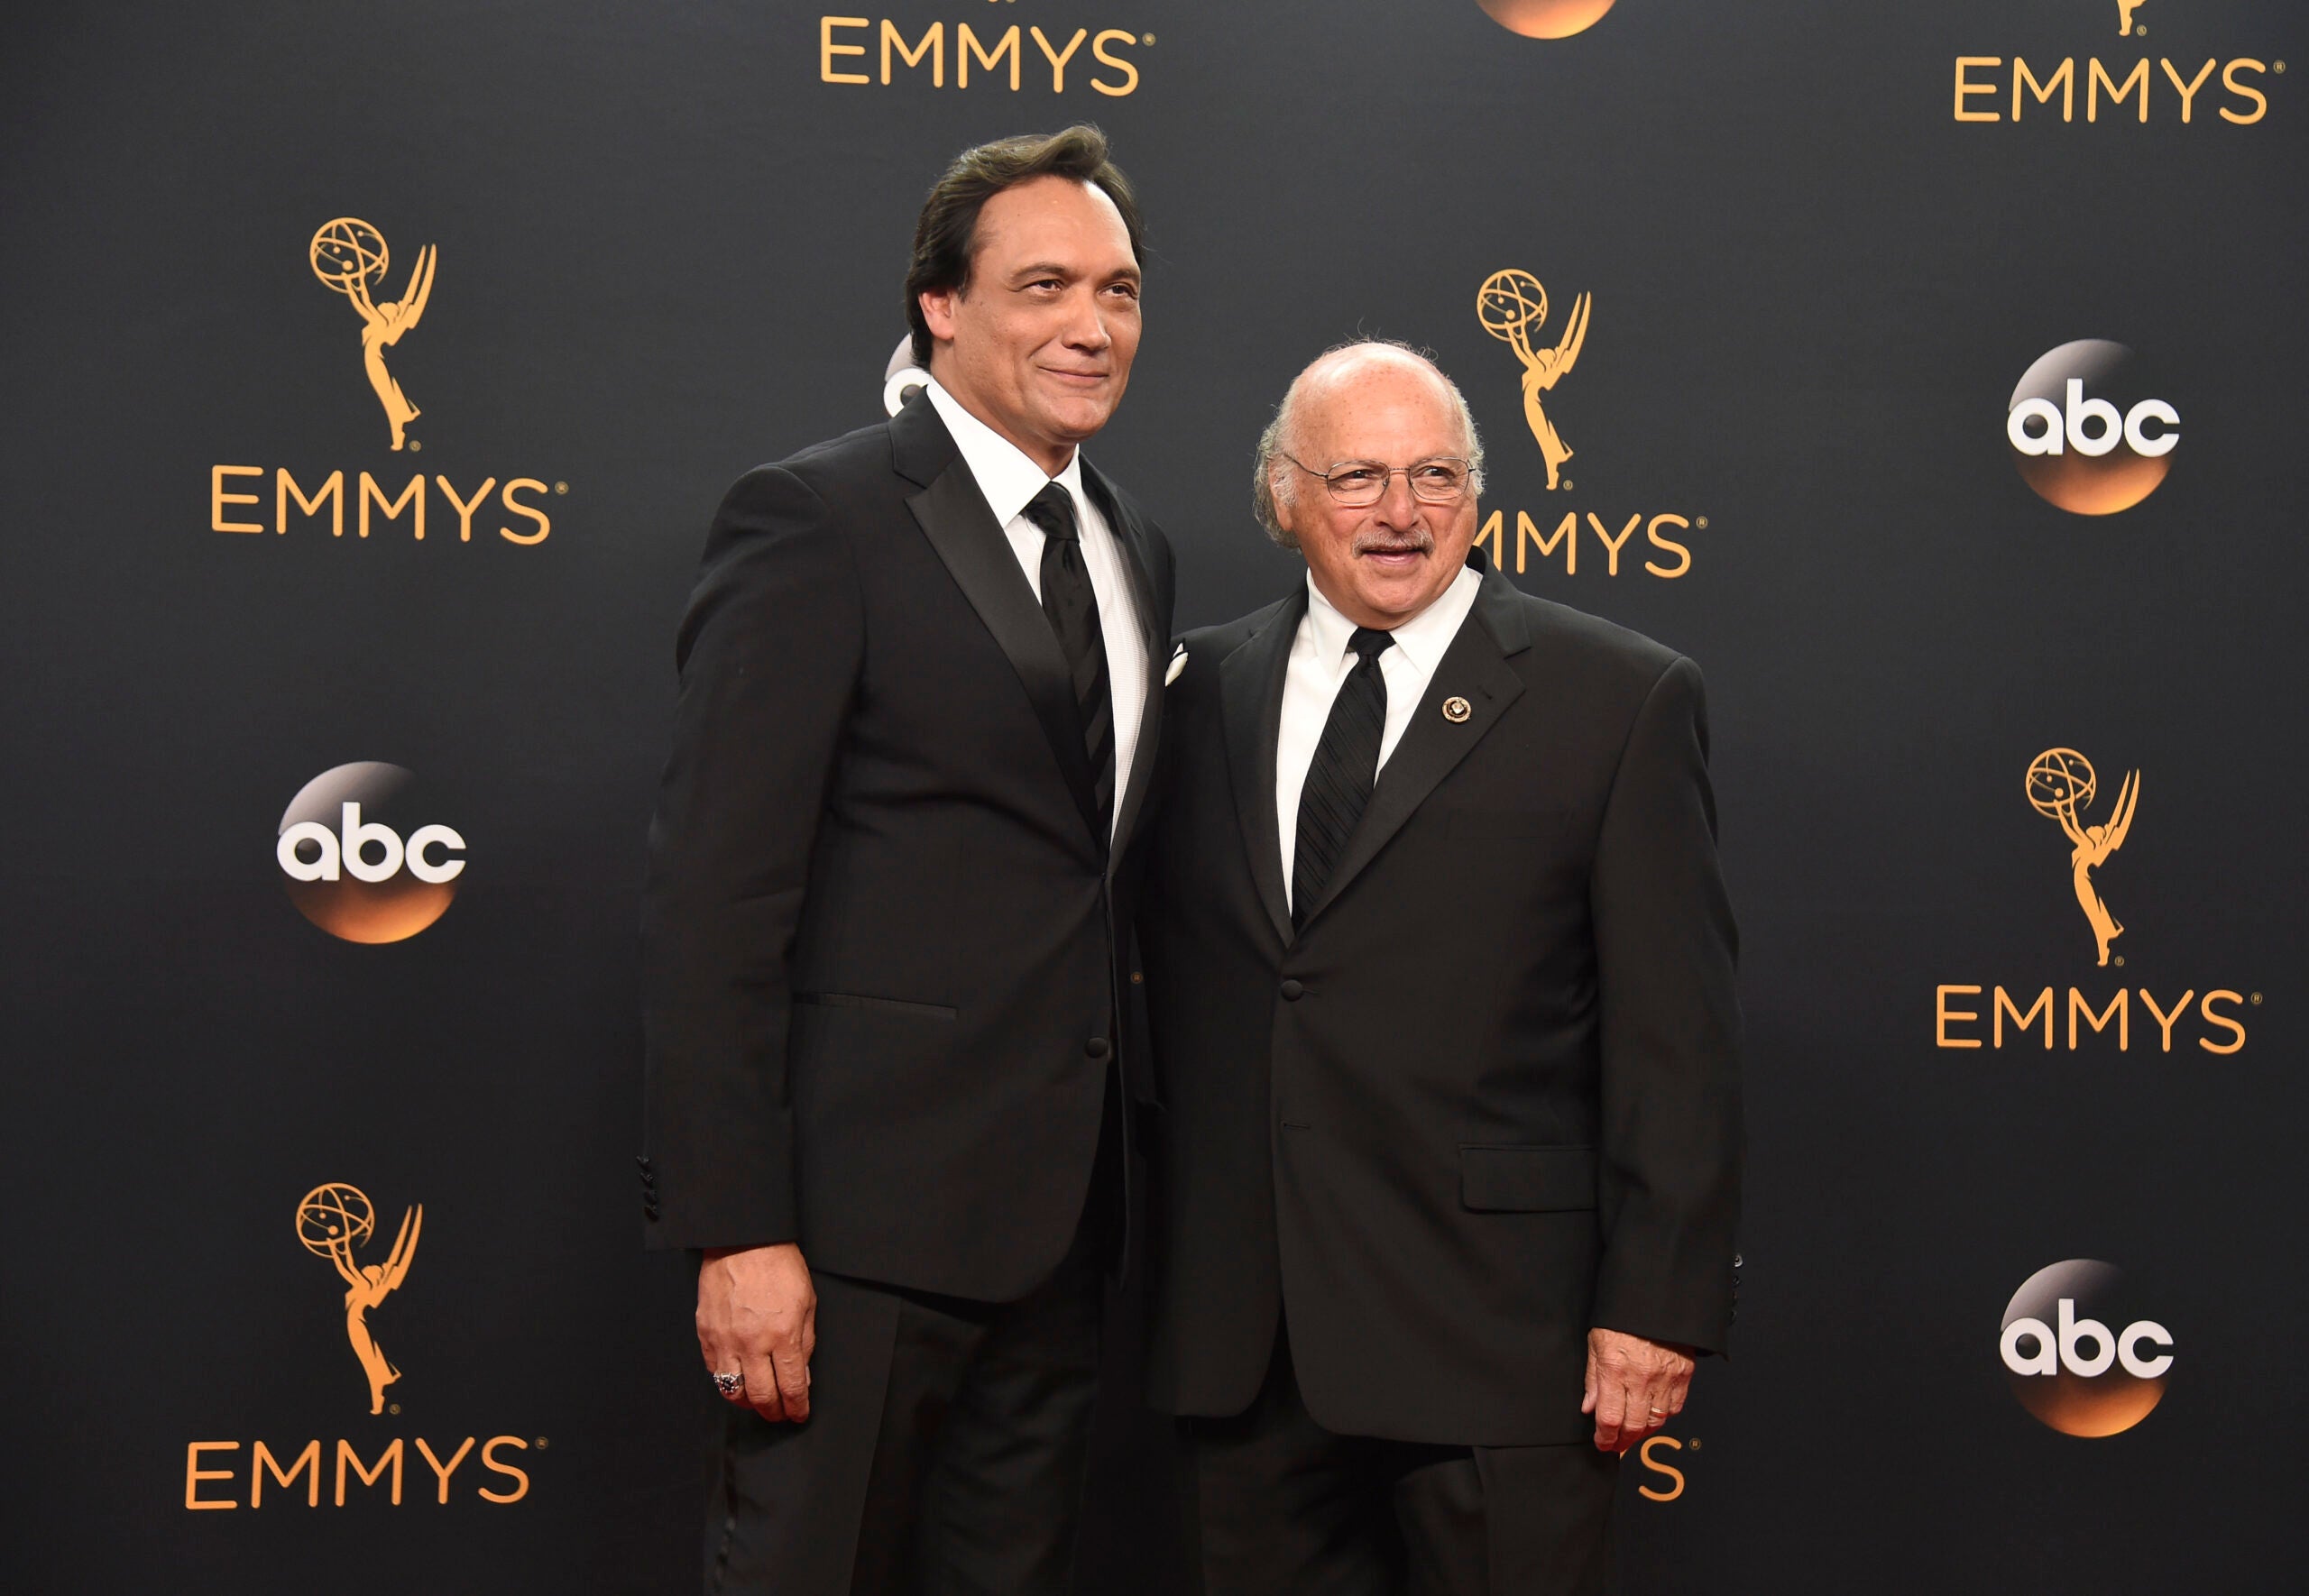 Game of Thrones big winner at 68th Emmy Awards